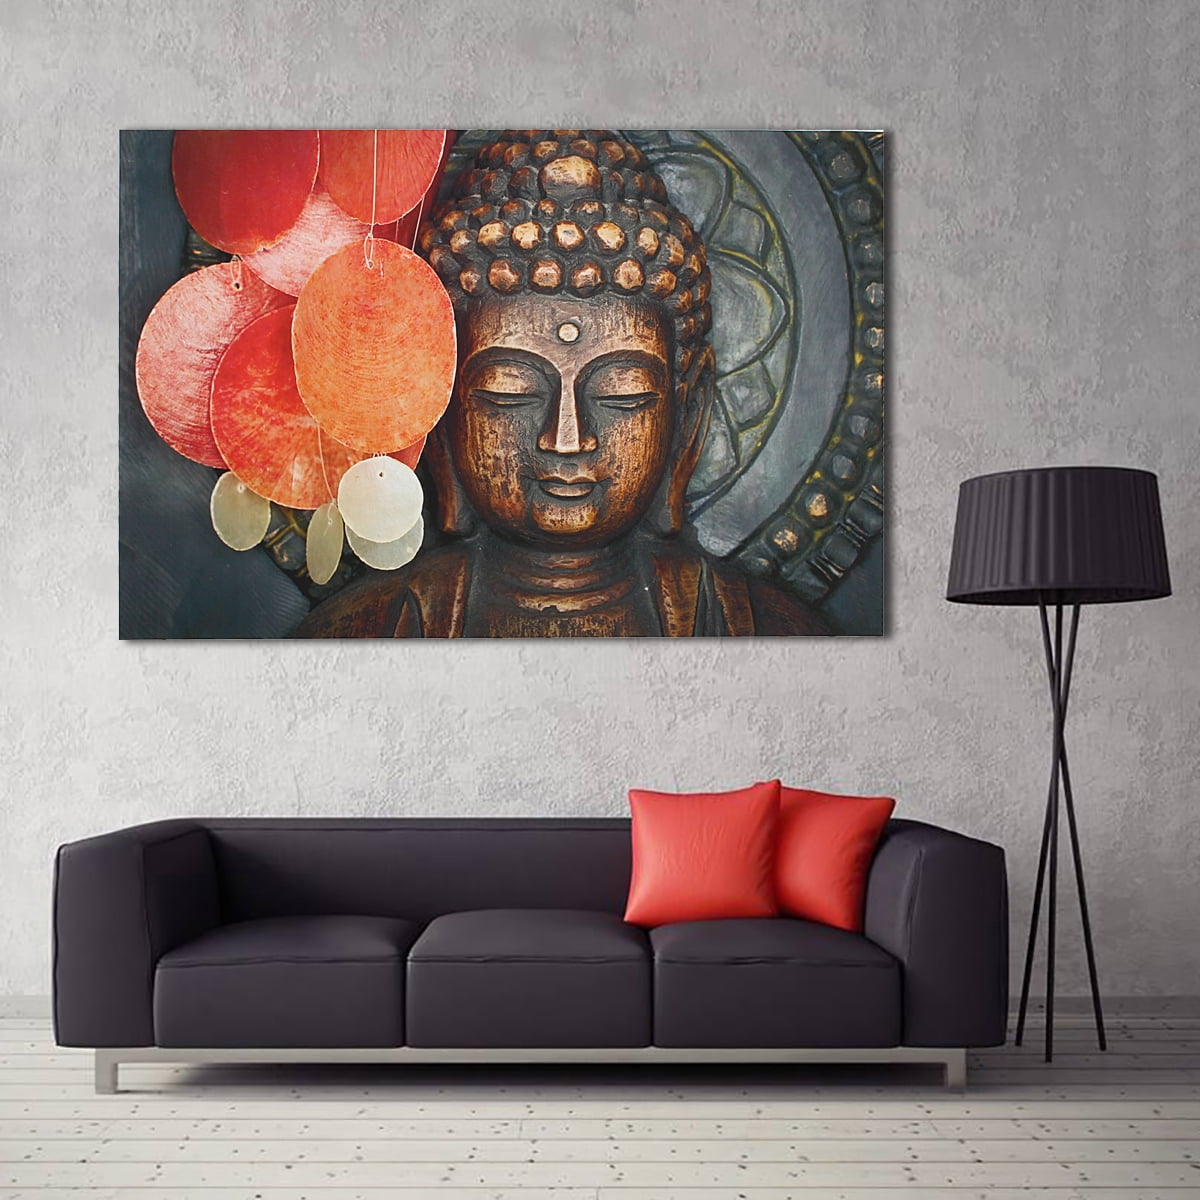 No Framed Fashion Canvas Prints Artwork Painting Picture Wall Art Buddha A-S 